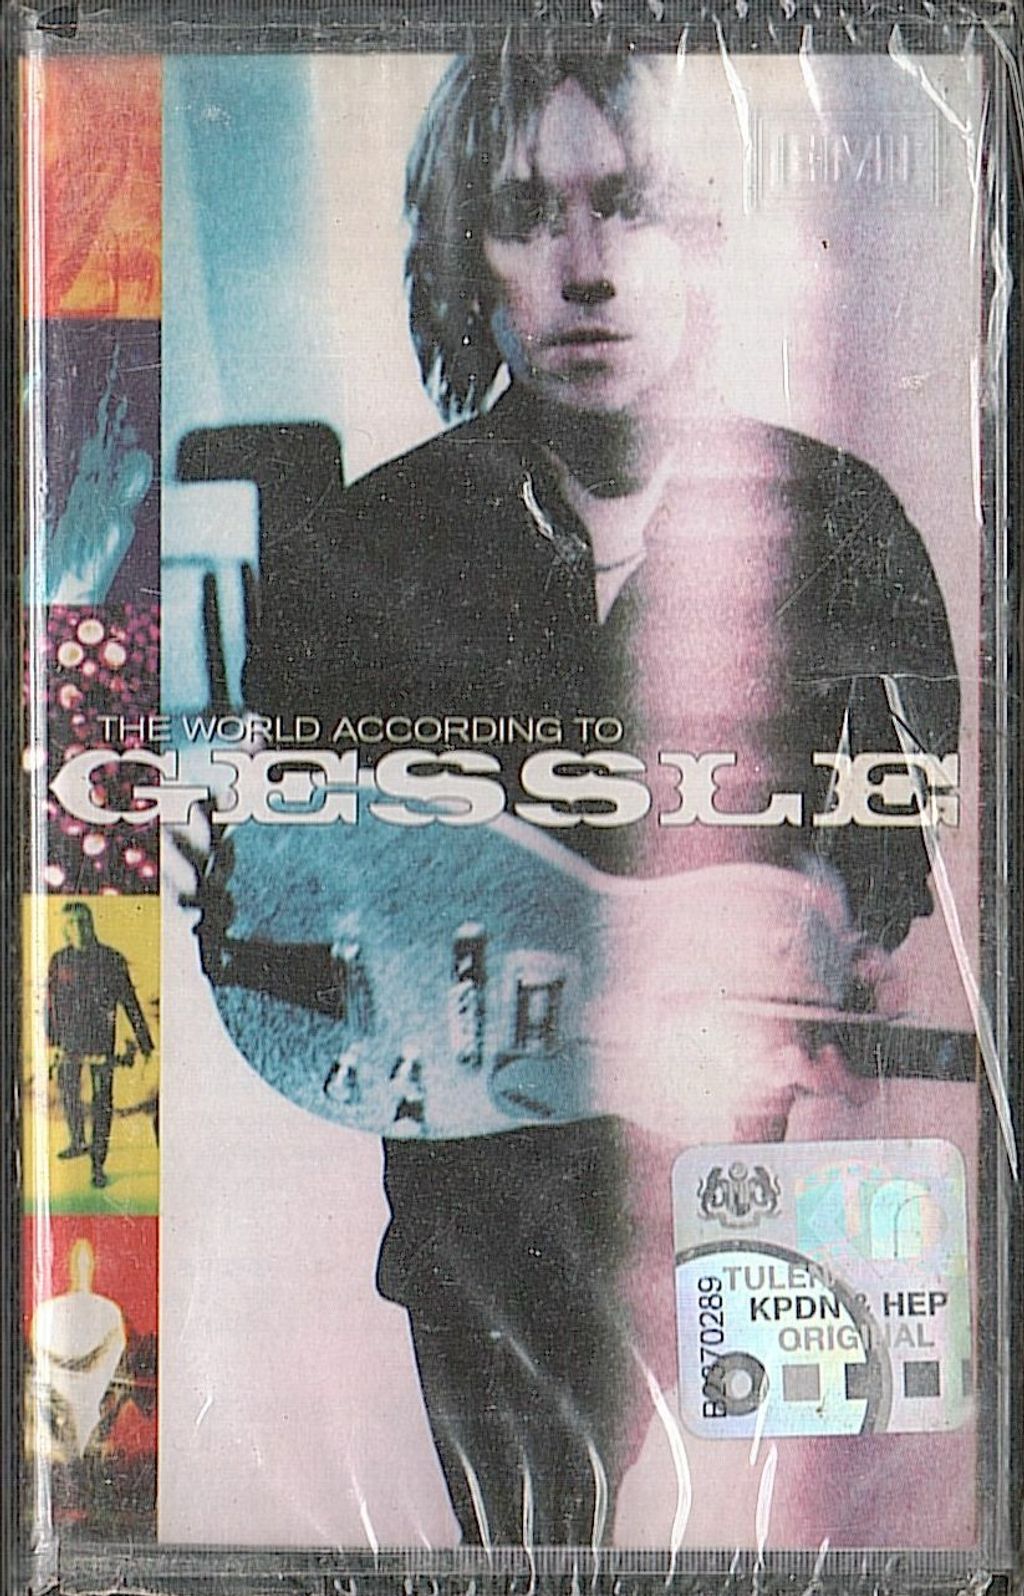 GESSLE The World According To CASSETTE TAPE.jpg